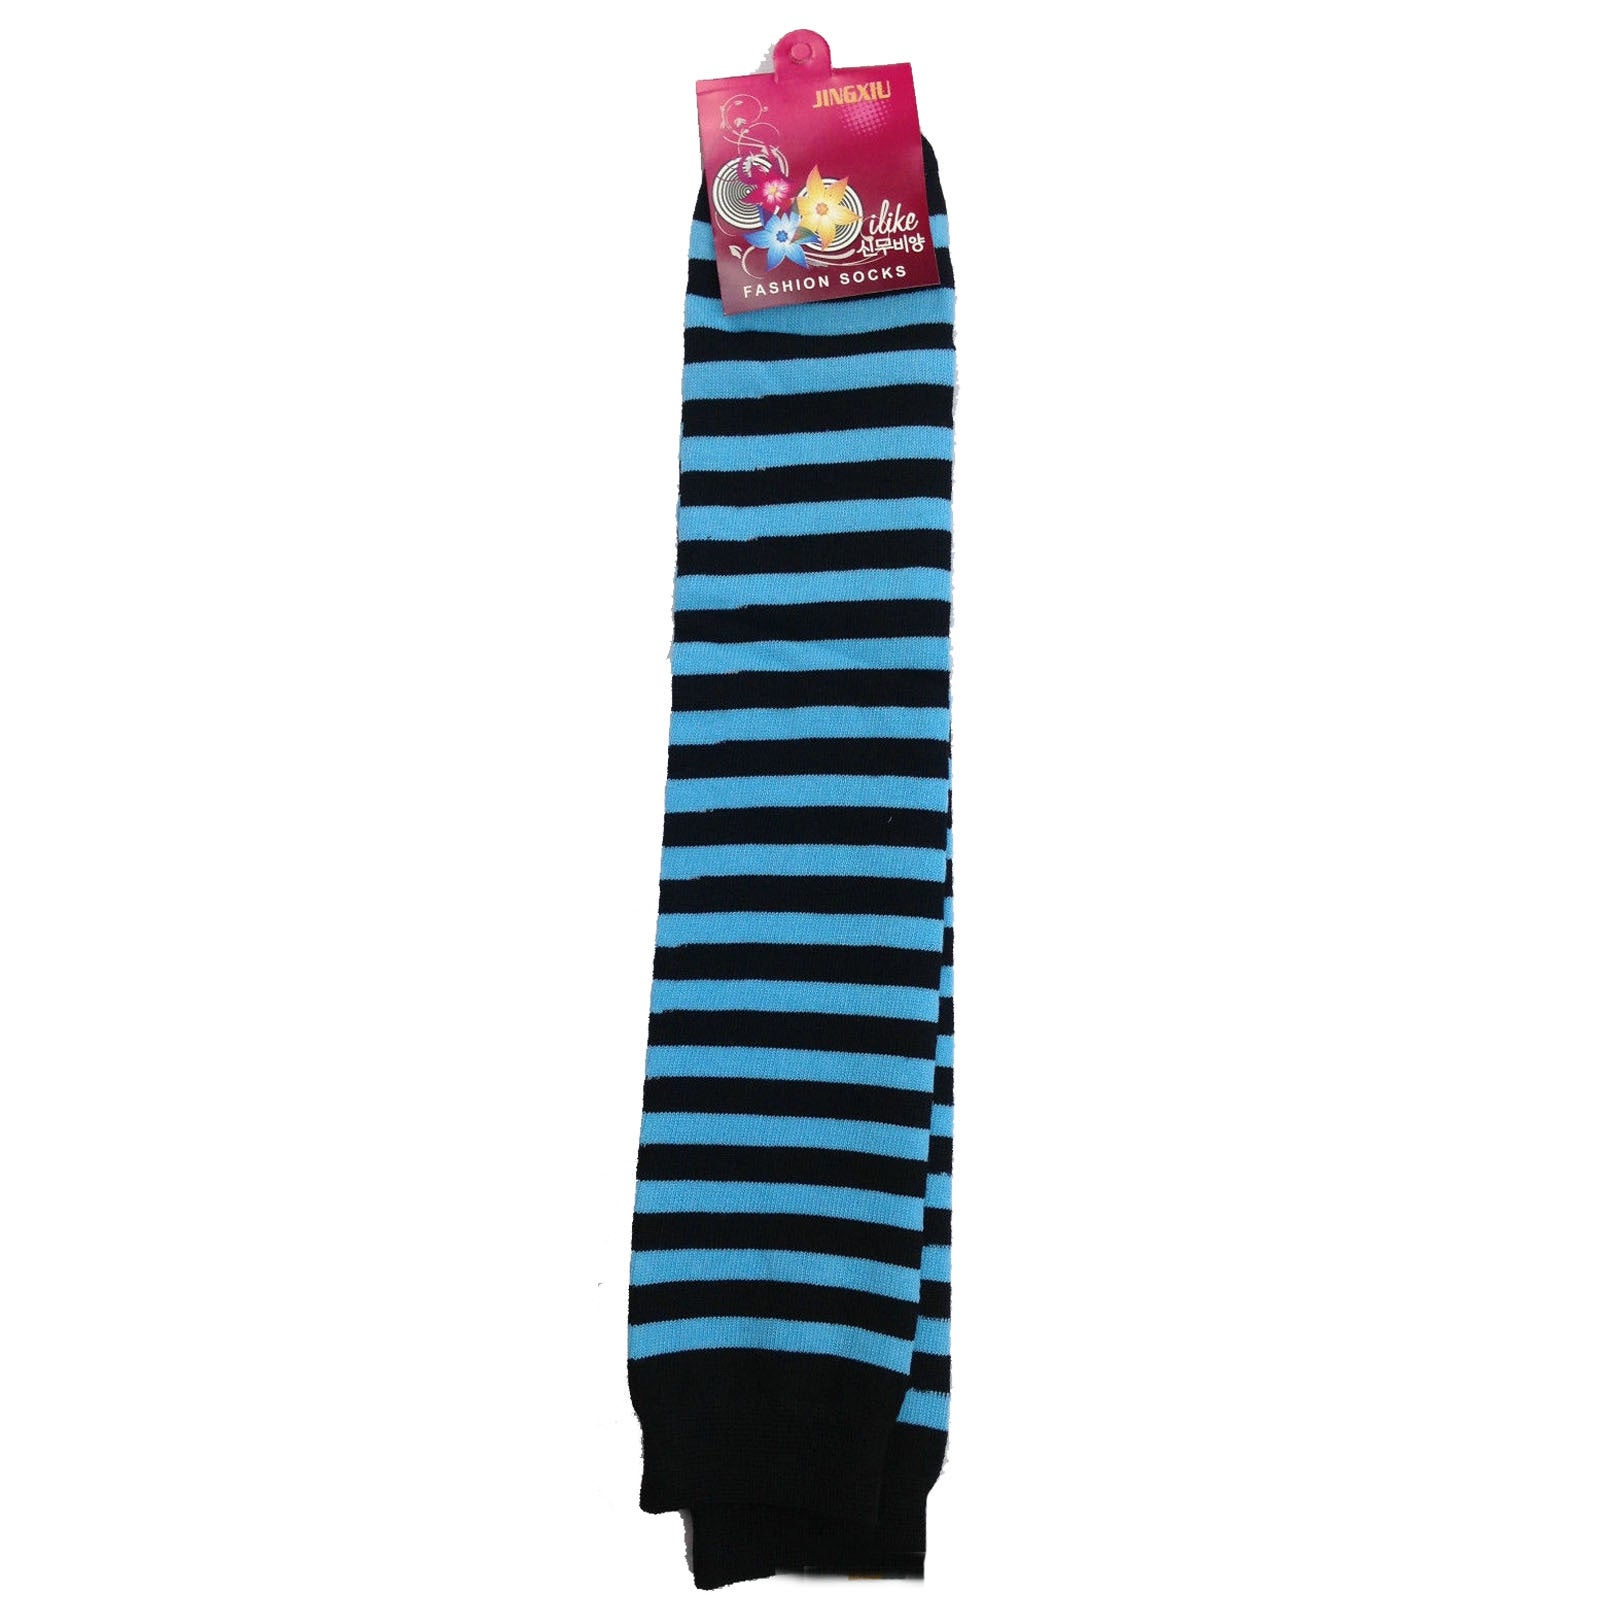 Long LEG WARMERS Party Costume Fine Knitted Stretch Ladies Girls Fancy Dress